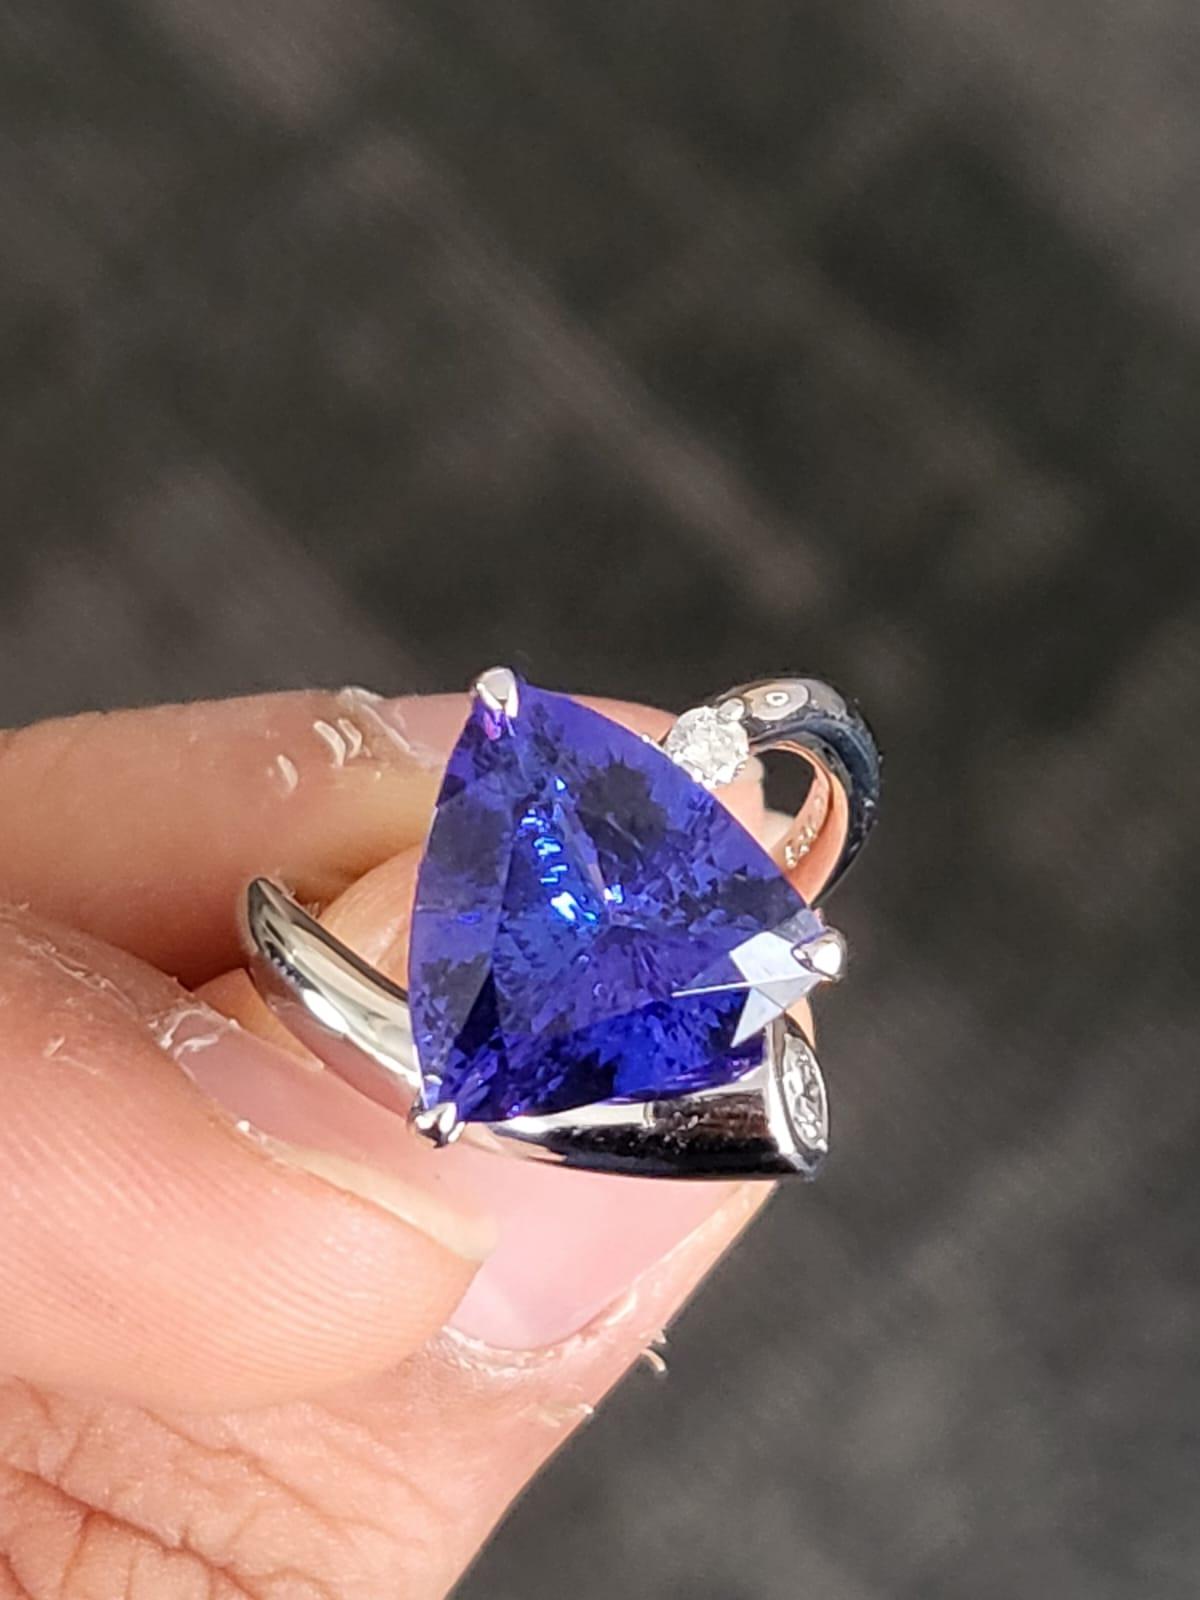 A very beautiful, Tanzanite Engagement Ring set in Platinum 900 & Diamonds. The weight of the Tanzanite is 5.80 carats. The Tanzanite is responsibly sourced from Tanzania. The weight of the Diamonds is 0.33 carats. Net Platinum weight is 8.87 grams.